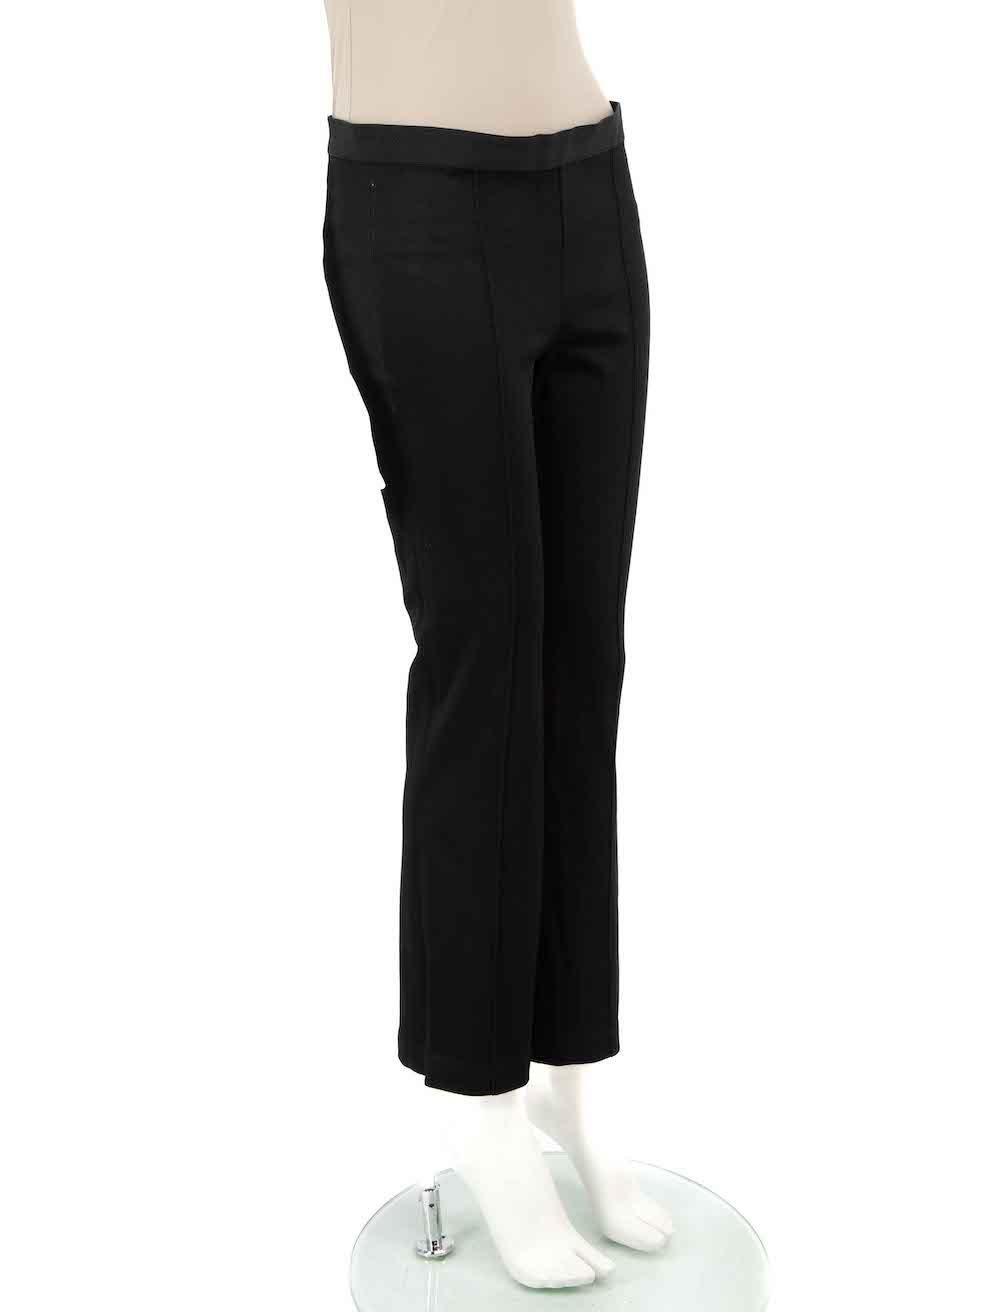 CONDITION is Very good. Hardly any visible wear to trousers is evident on this used Helmut Lang designer resale item.
 
 
 
 Details
 
 
 Black
 
 Viscose
 
 Flared trousers
 
 Mid rise
 
 Stretchy
 
 Elasticated waistband
 
 
 
 
 
 Made in China
